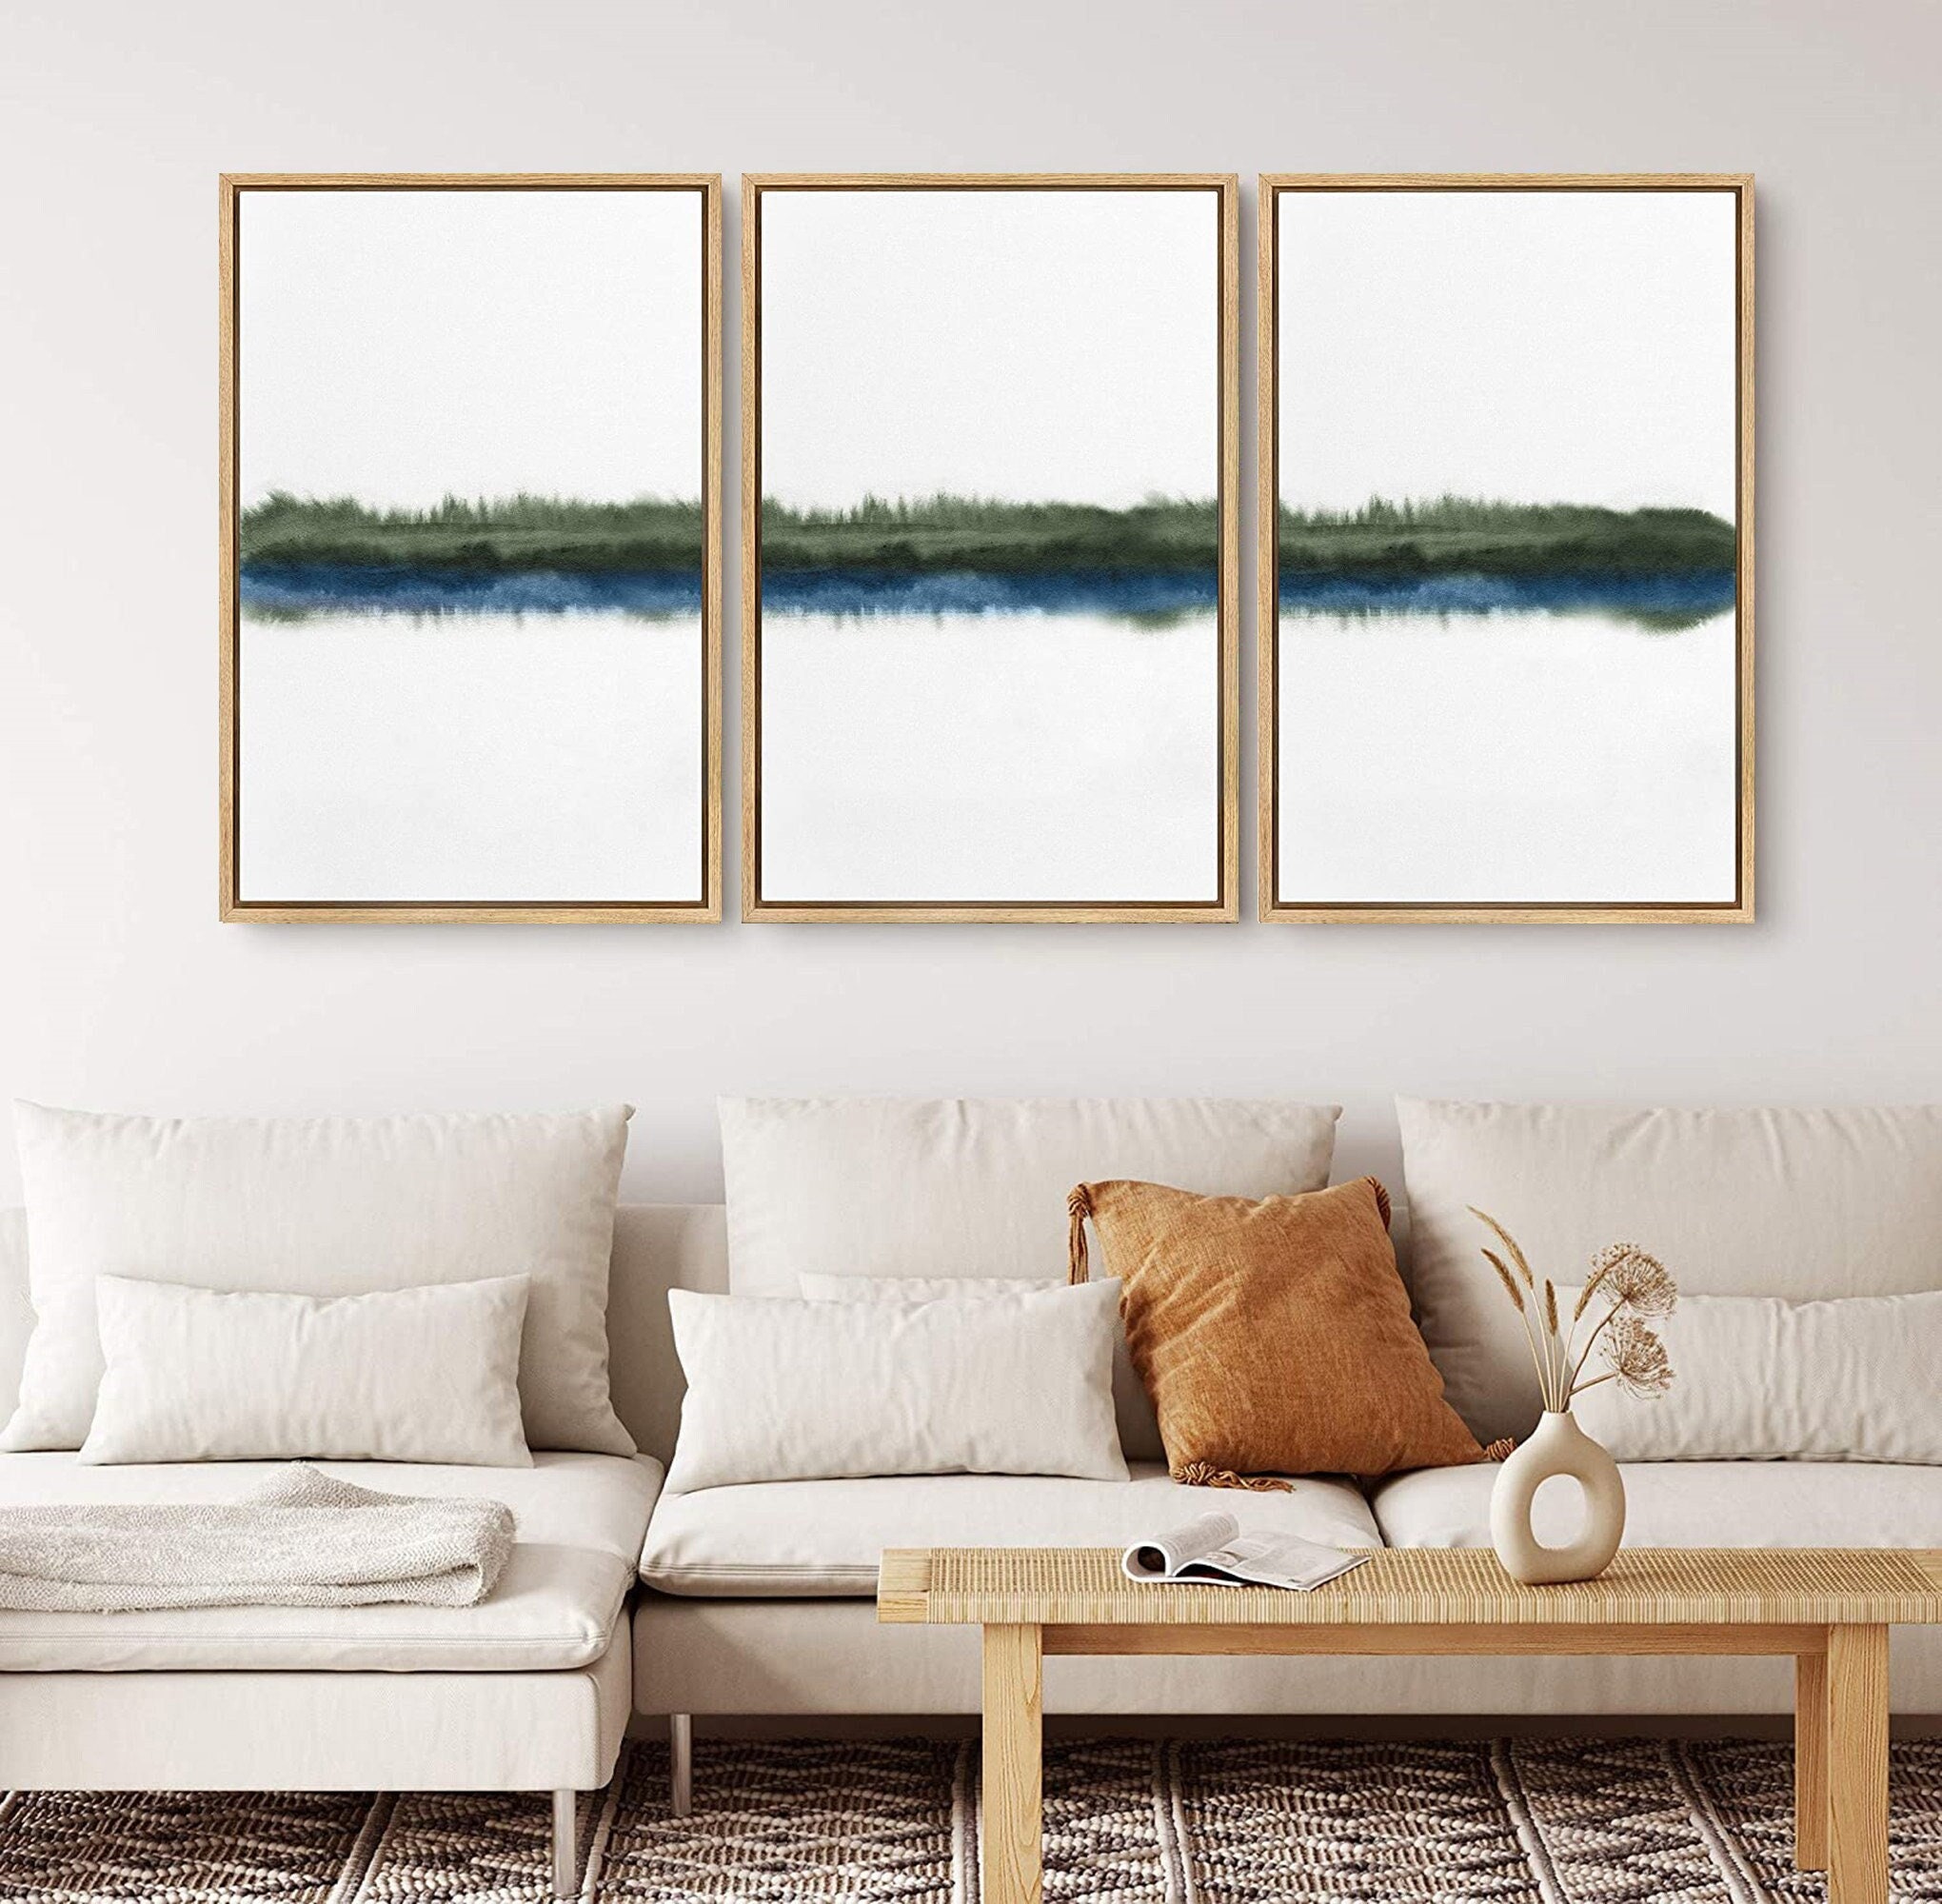 SIGNWIN 3 Piece Framed Canvas Wall Art Watercolor Abstract Mountains Nature Painting Prints Minimalist Modern Home Artwork Decoration